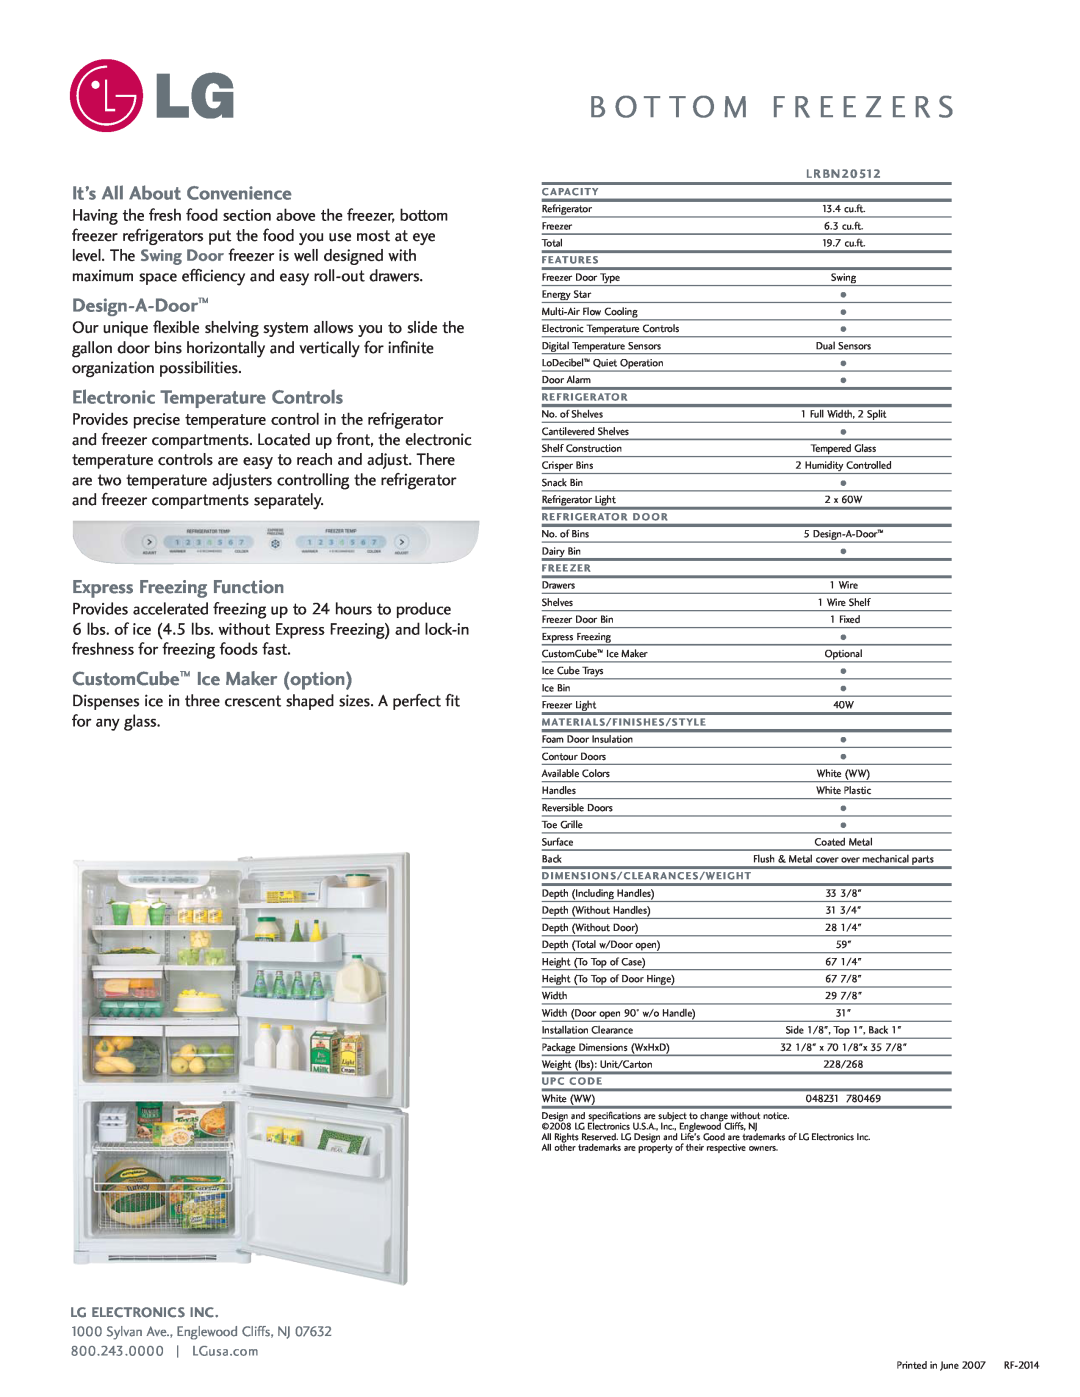 LG Electronics LRBN20512 manual It’s All About Convenience, Design-A-Door, Electronic Temperature Controls 